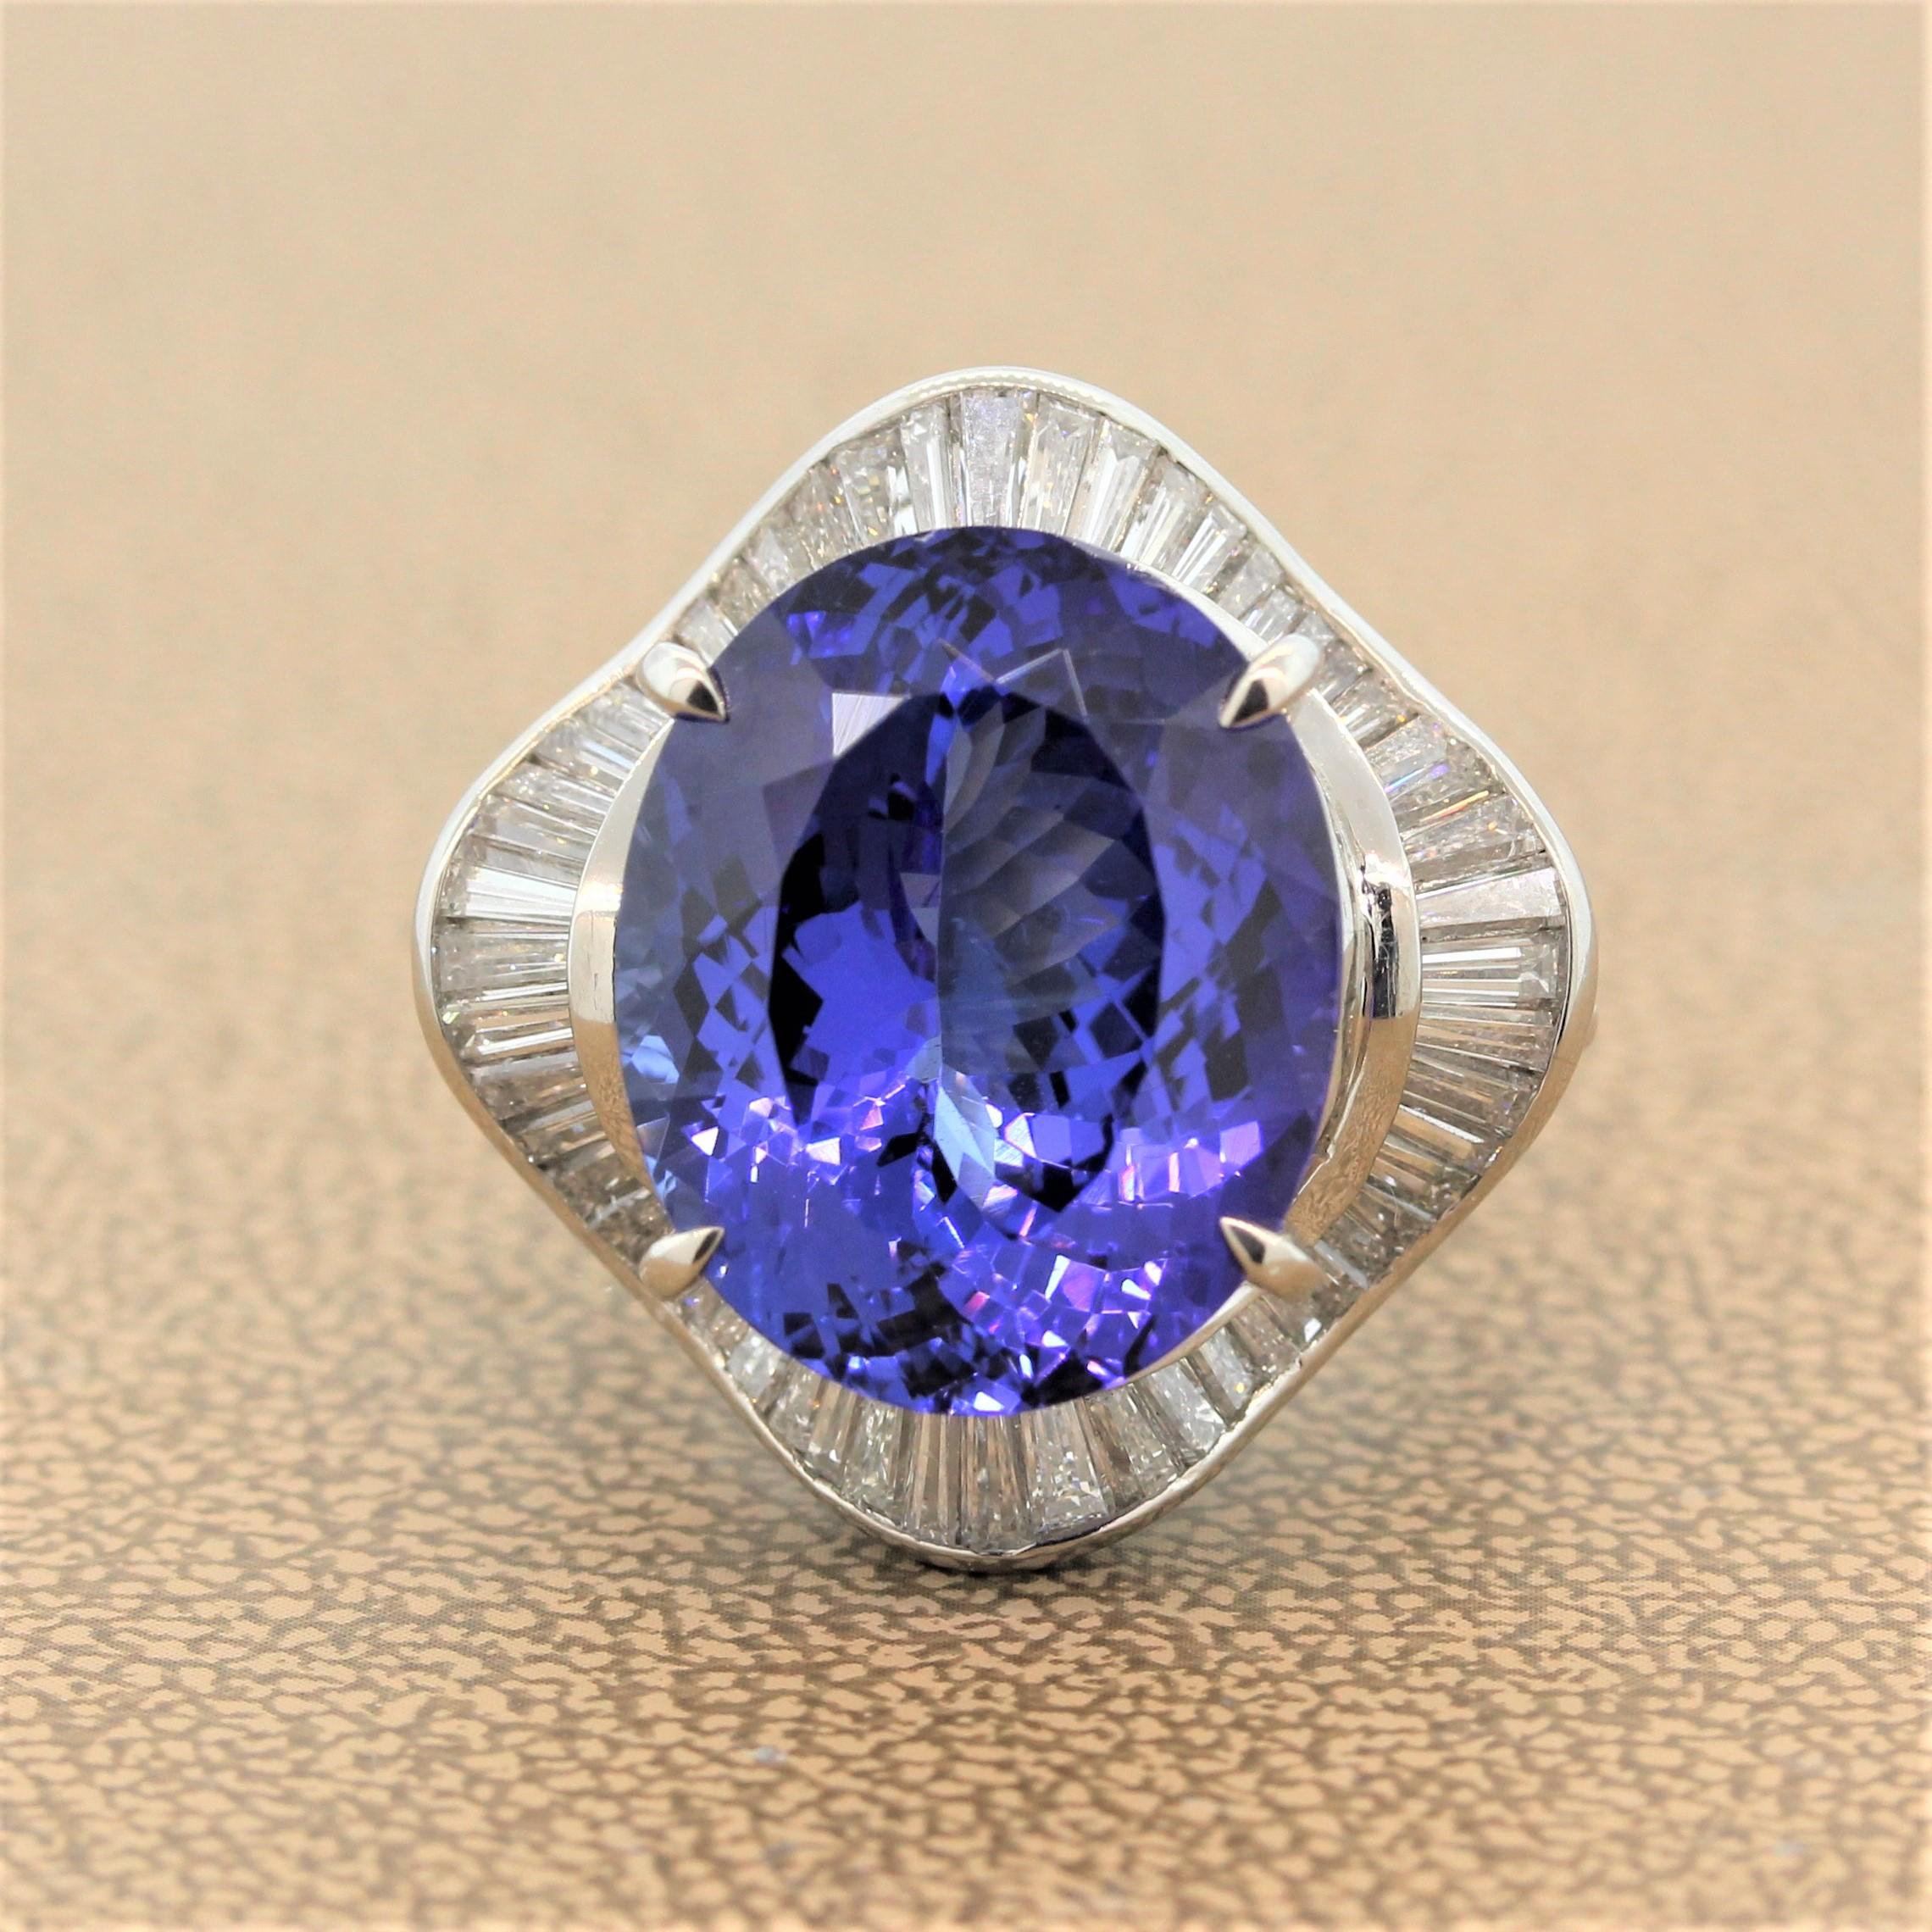 A beautiful platinum ring featuring a 15.33 carat tanzanite with a strong blue color and flashes of purple. The oval cut twinkling tanzanite is haloed by 1.74 carats of baguette cut diamonds in flirty ballerina designed platinum setting.

Ring Size